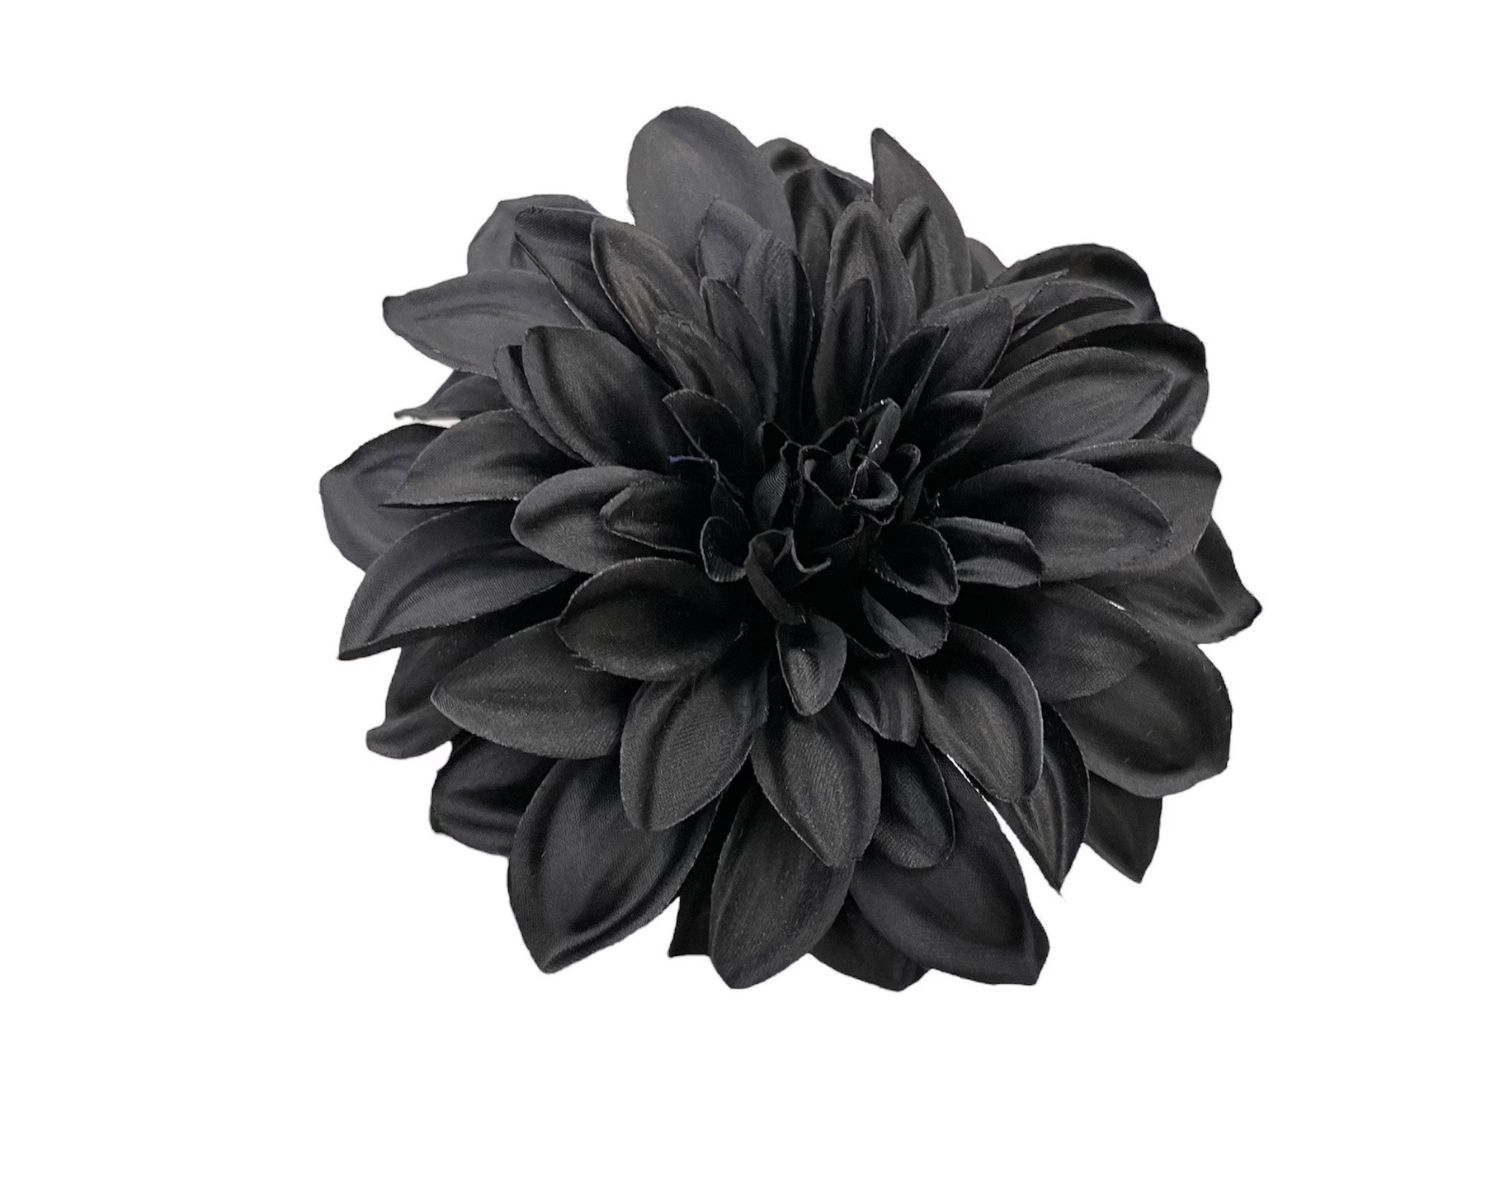 15-extraordinary-facts-about-black-dahlia-flower